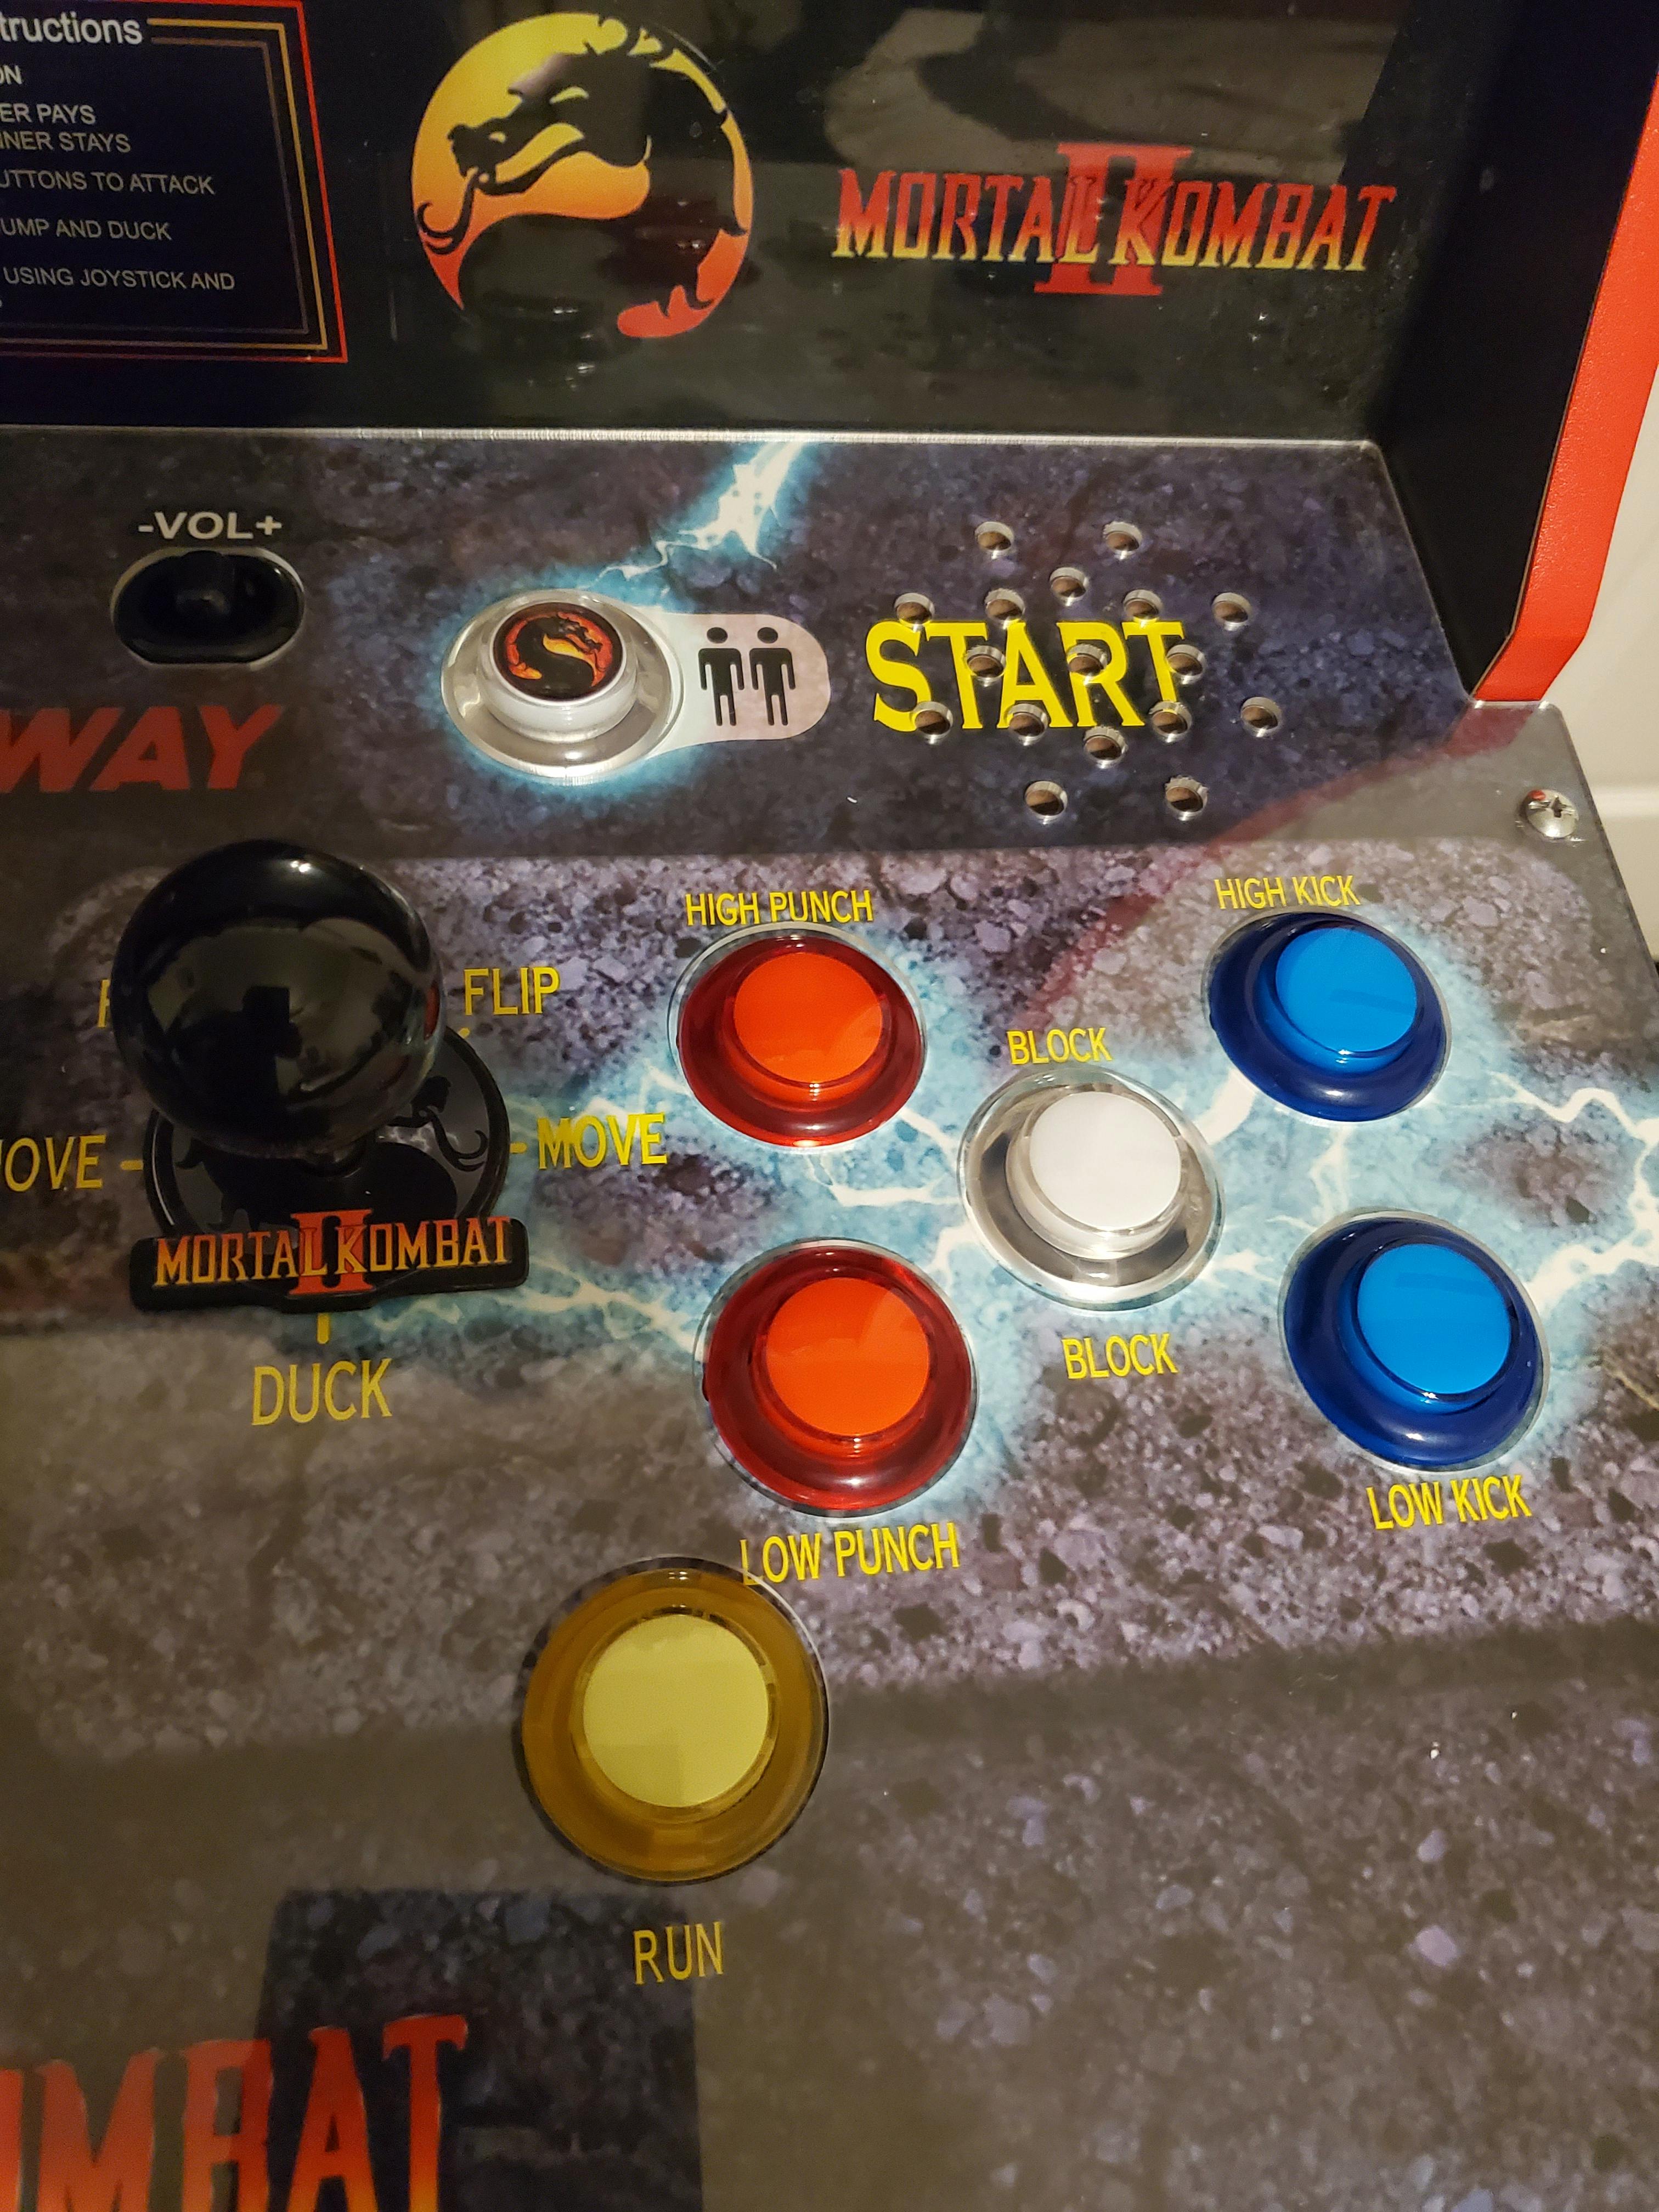 mortal kombat arcade with 6 buttons